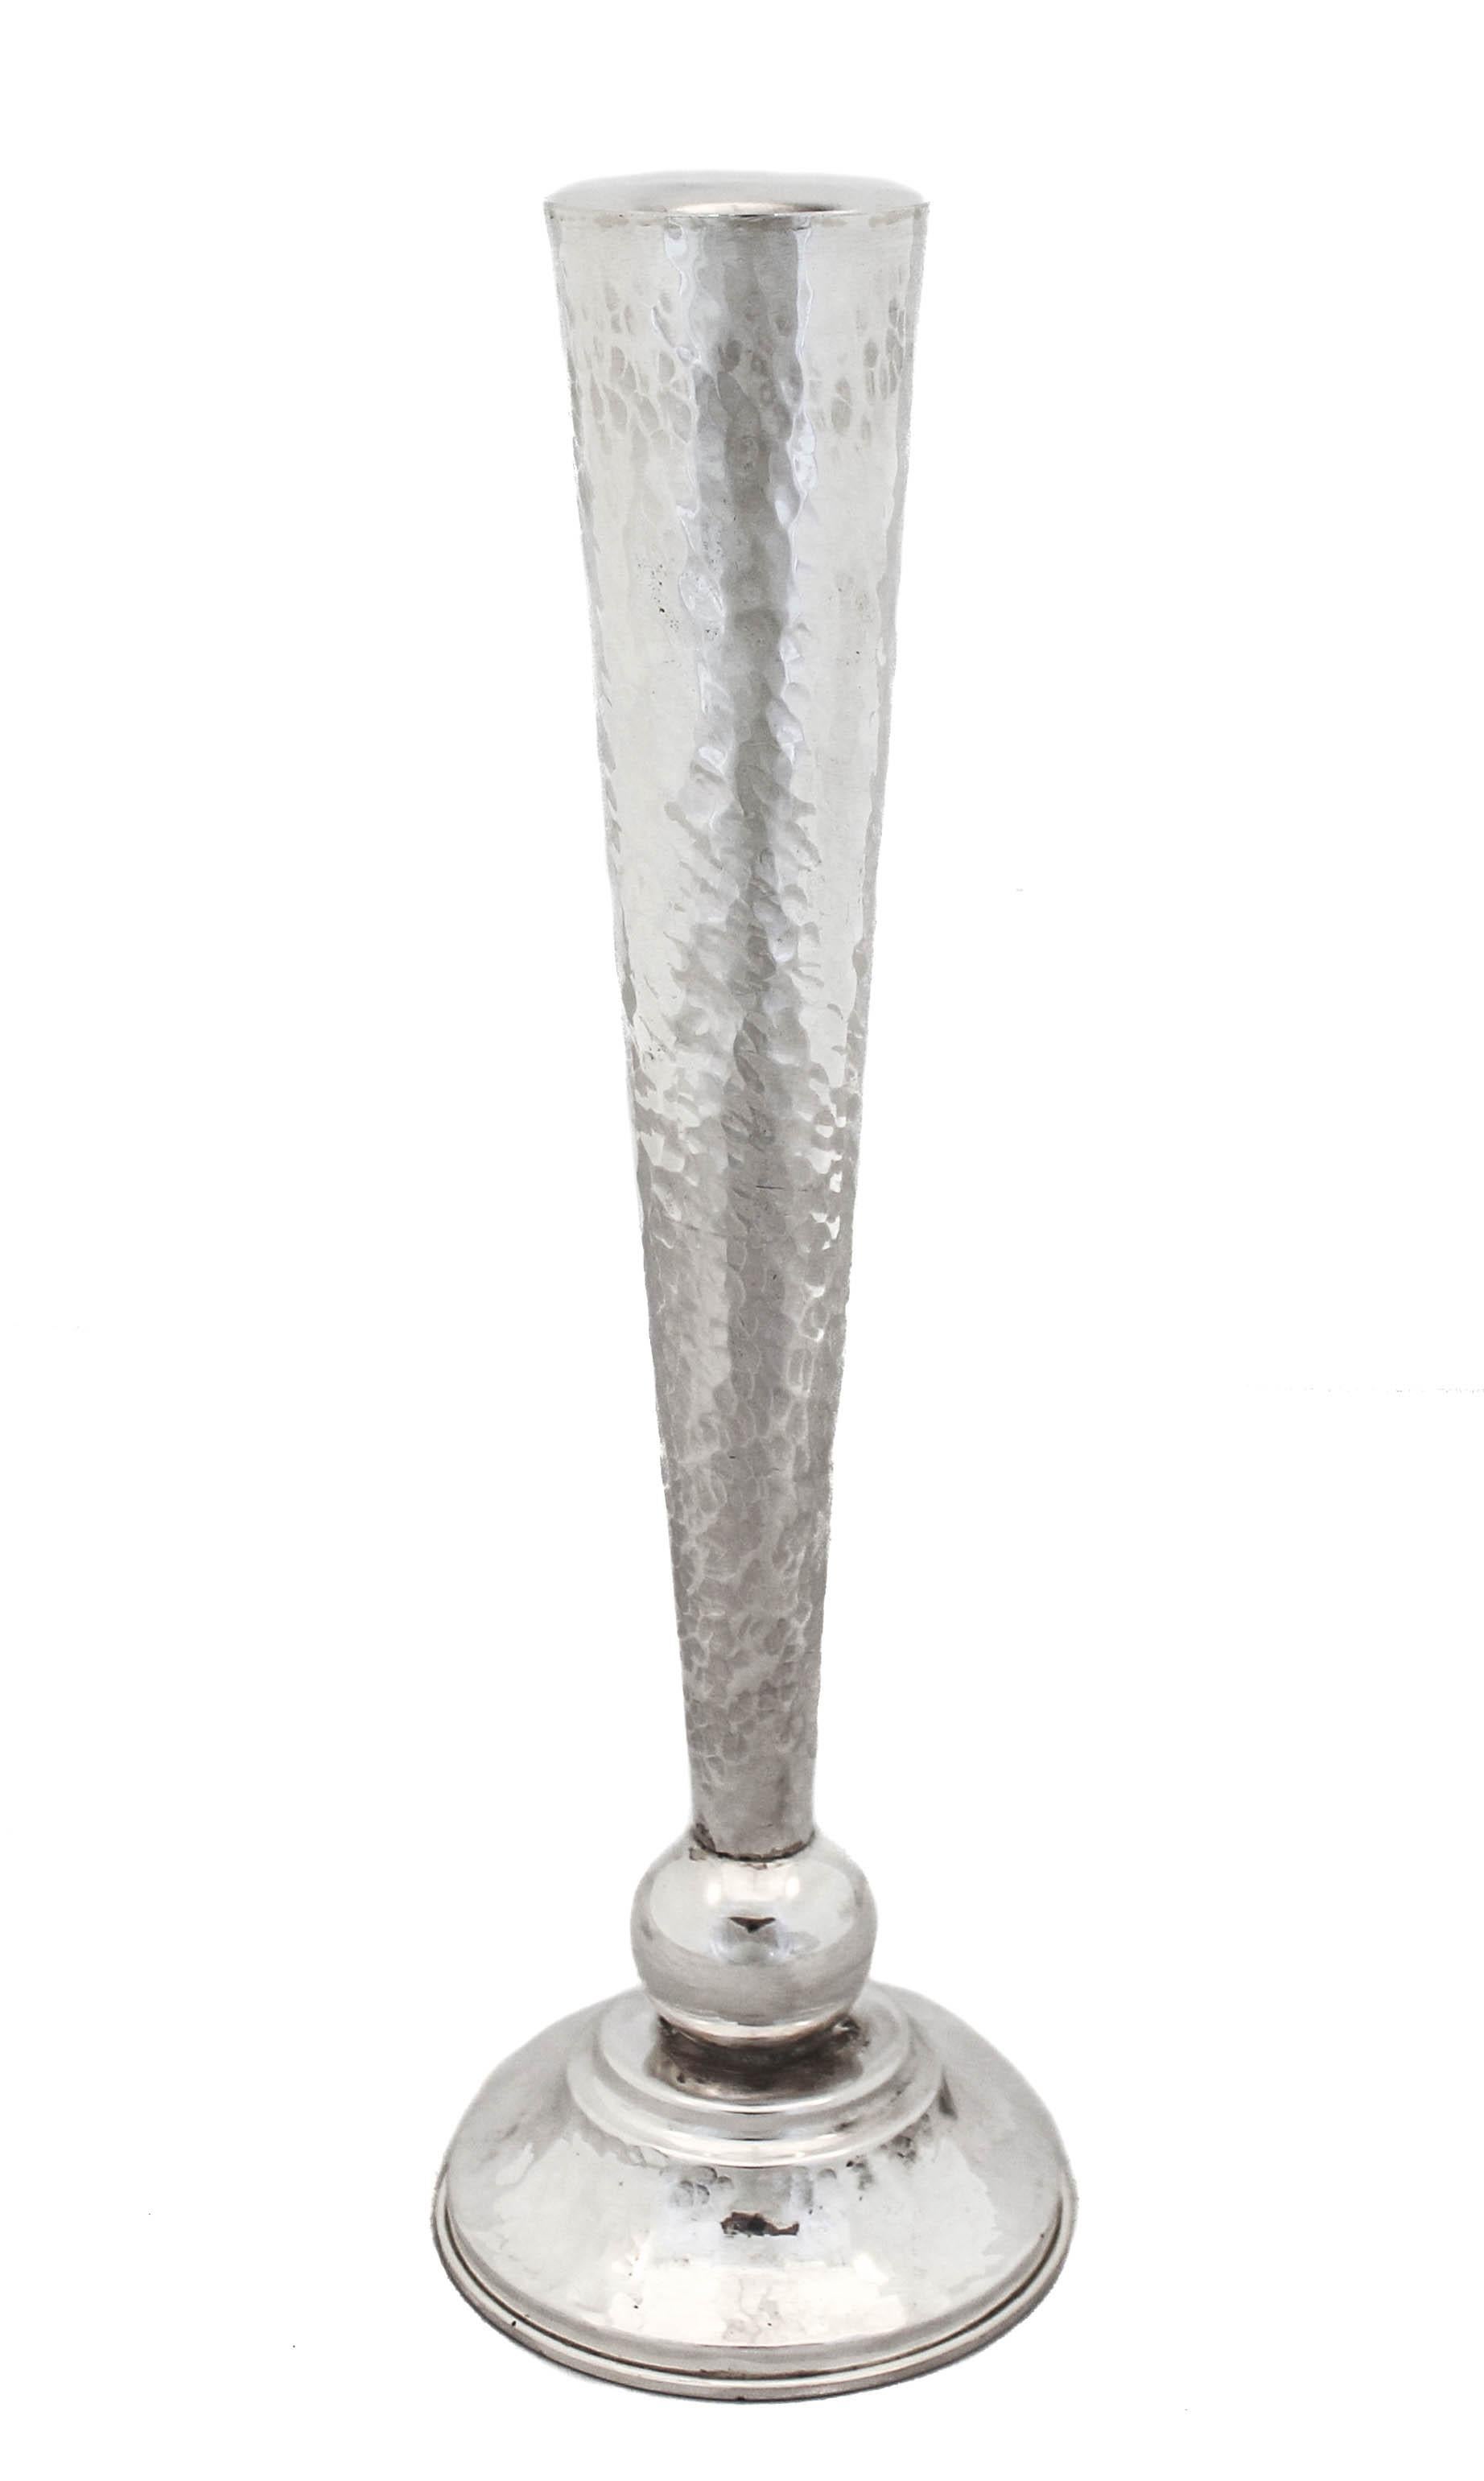 These sterling silver candlesticks are contemporary and sleek, not your grandmother’s old fashion sterling.   A fresh young, modern feel will make any bride want to use these candlesticks each Shabbat and holiday. They have a hammered finish with a